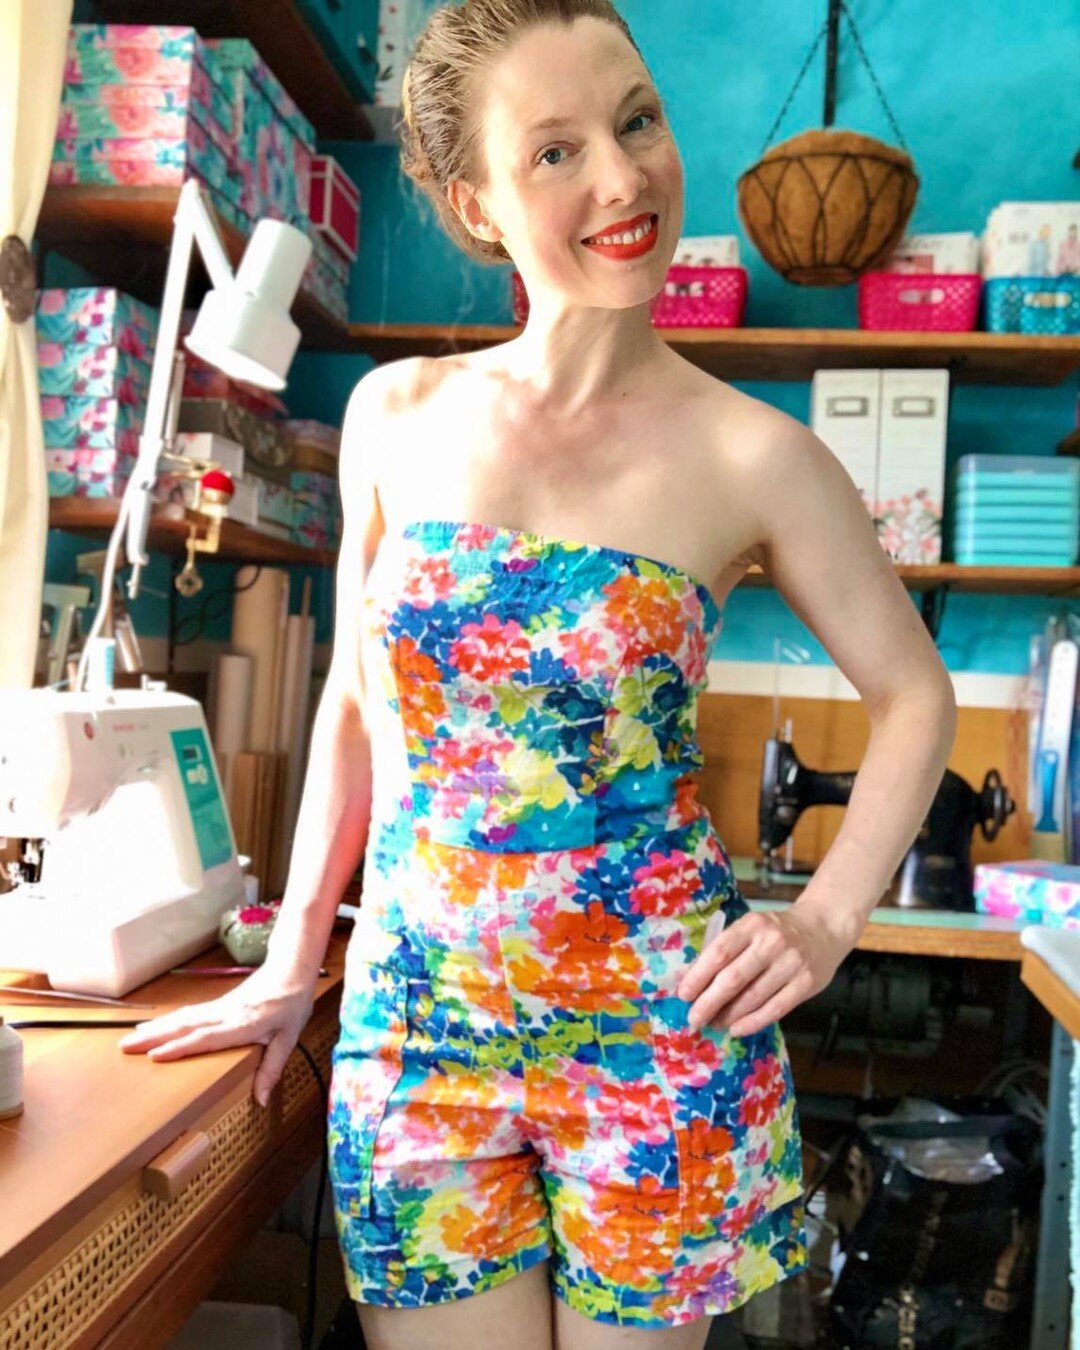 Every girl needs pockets to carry her secrets in&hellip;Or her seam ripper. 🤫🪡😉

Linen shortie jumpsuit (I will NOT say romper! 🤯) with floral print fabric from JOANN Fabric and Craft Stores, bought maybe five years ago. 
This fabulous lipstick i